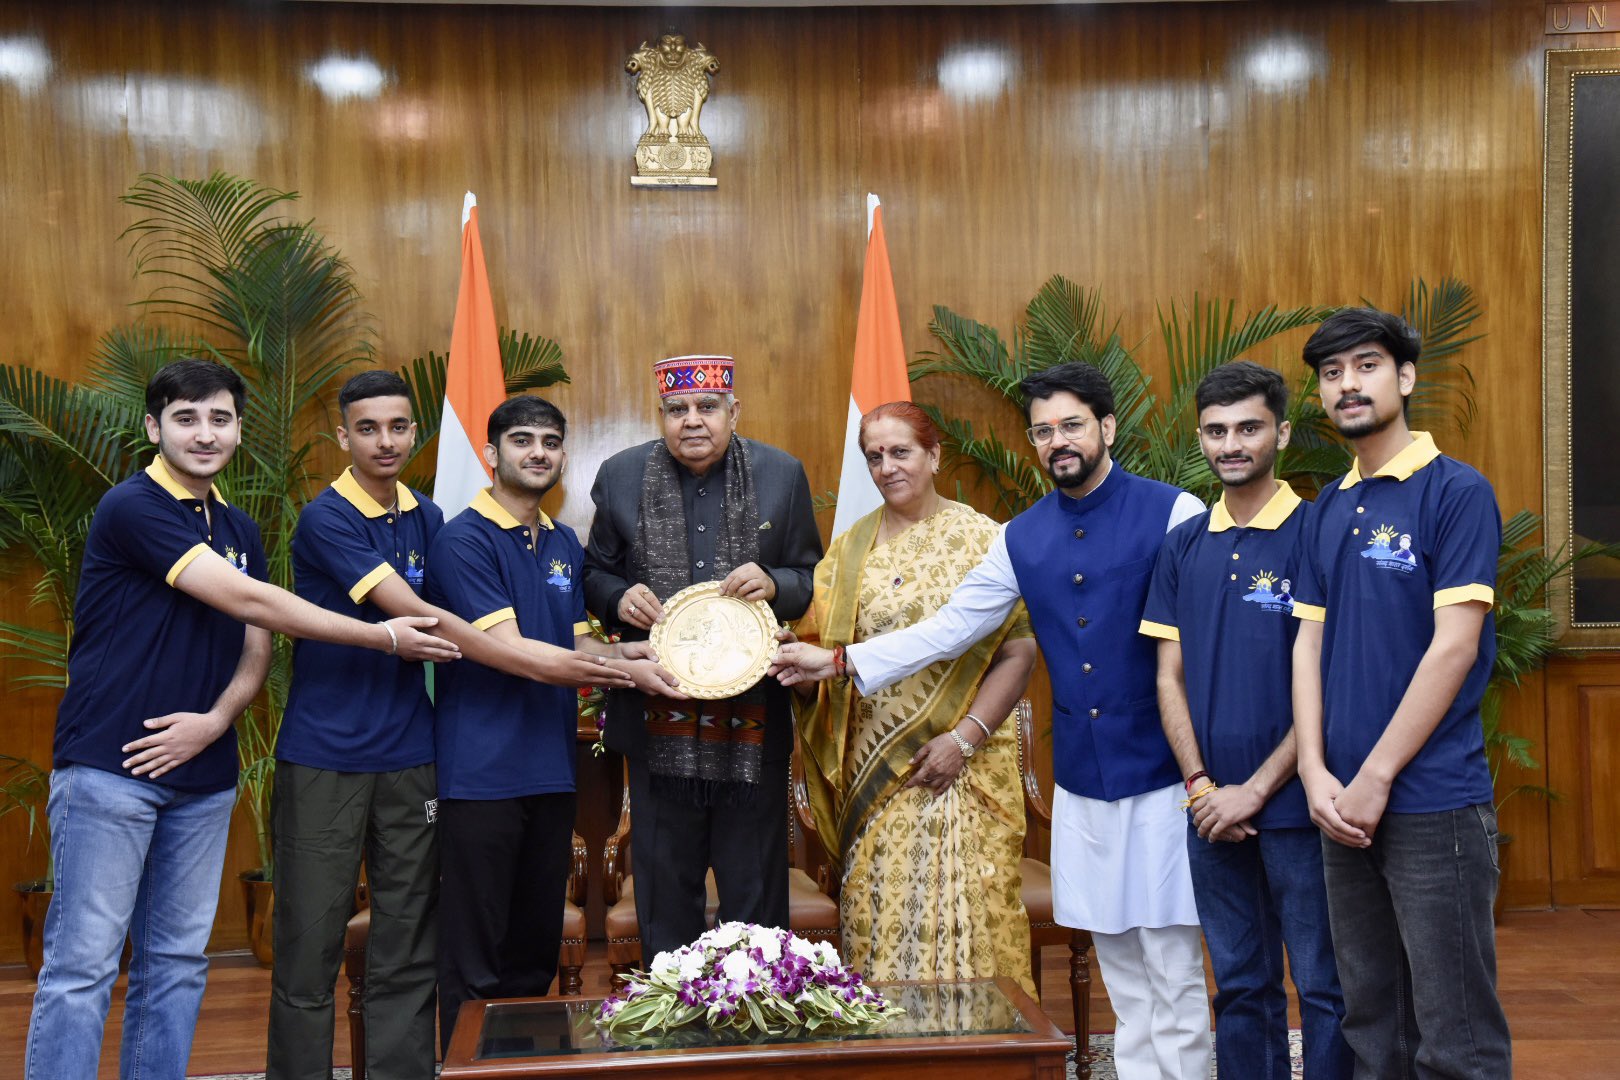 Students from Hamirpur Parliamentary constituency selected under the 'Sansad Bharat Darshan' initiative led by Union Minister, Shri Anurag Singh Thakur called on the the Vice-President, Shri Jagdeep Dhankhar at Upa-Rashtrapati Nivas in New Delhi on October 26, 2023.